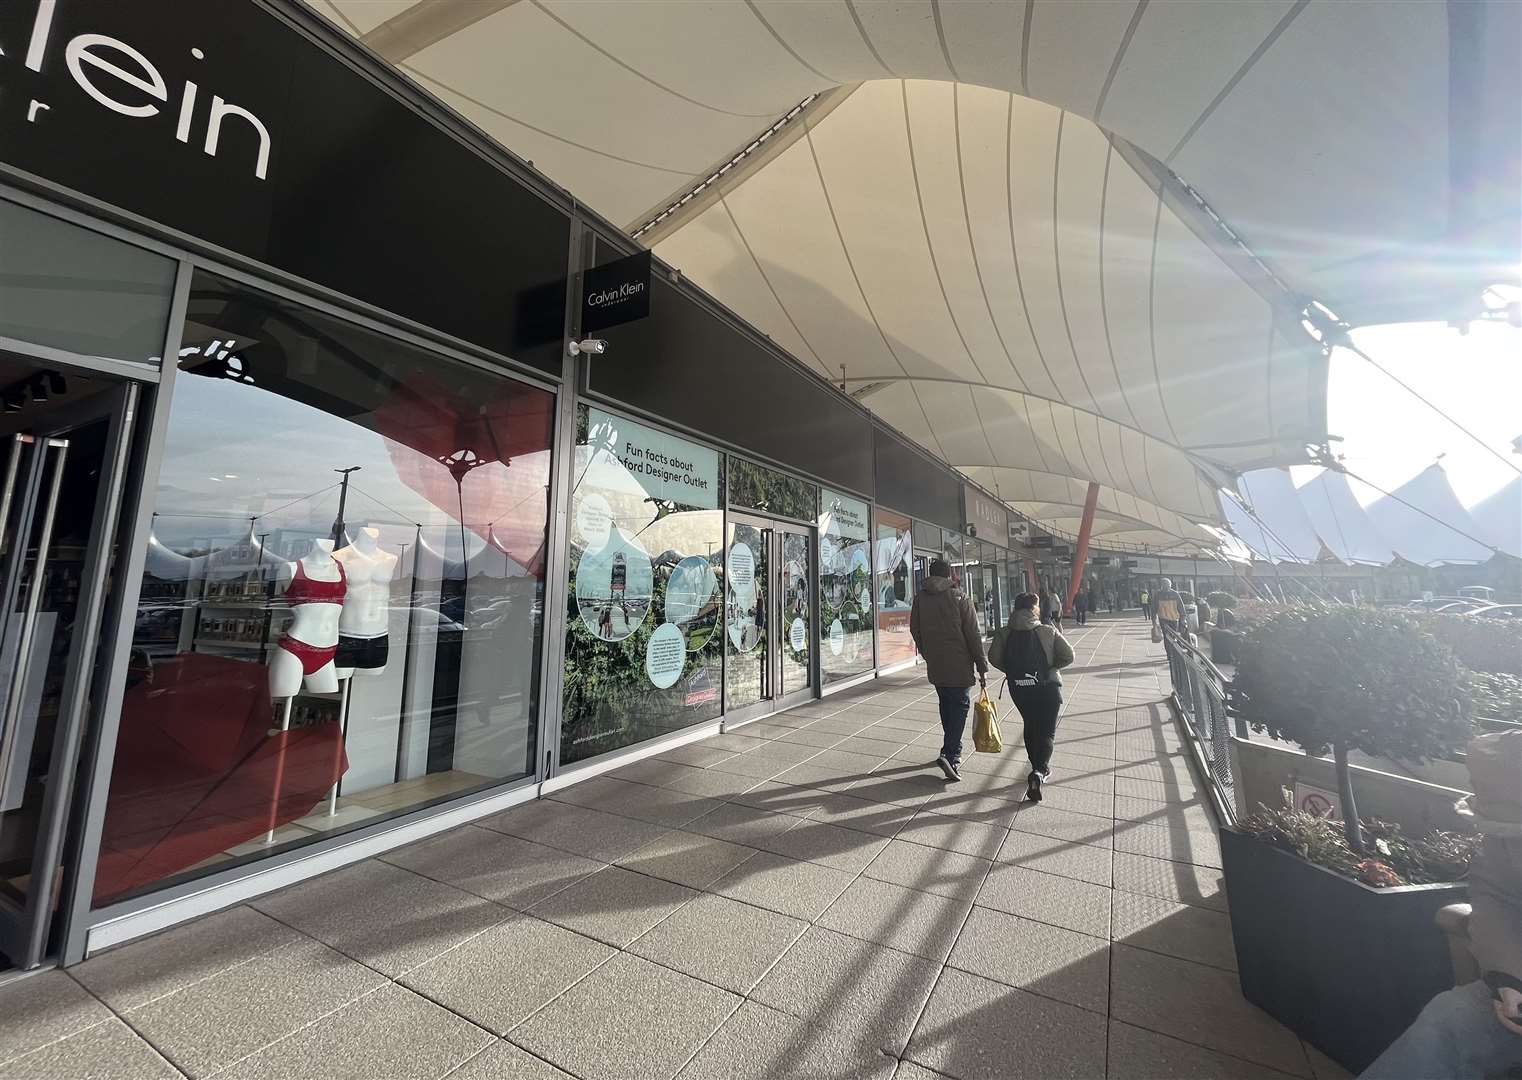 Changes have been brought in for staff at Ashford Designer Outlet to leave their cars in the main car park after 5pm at weekends only, which some say does not go far enough to protect staff over security concerns